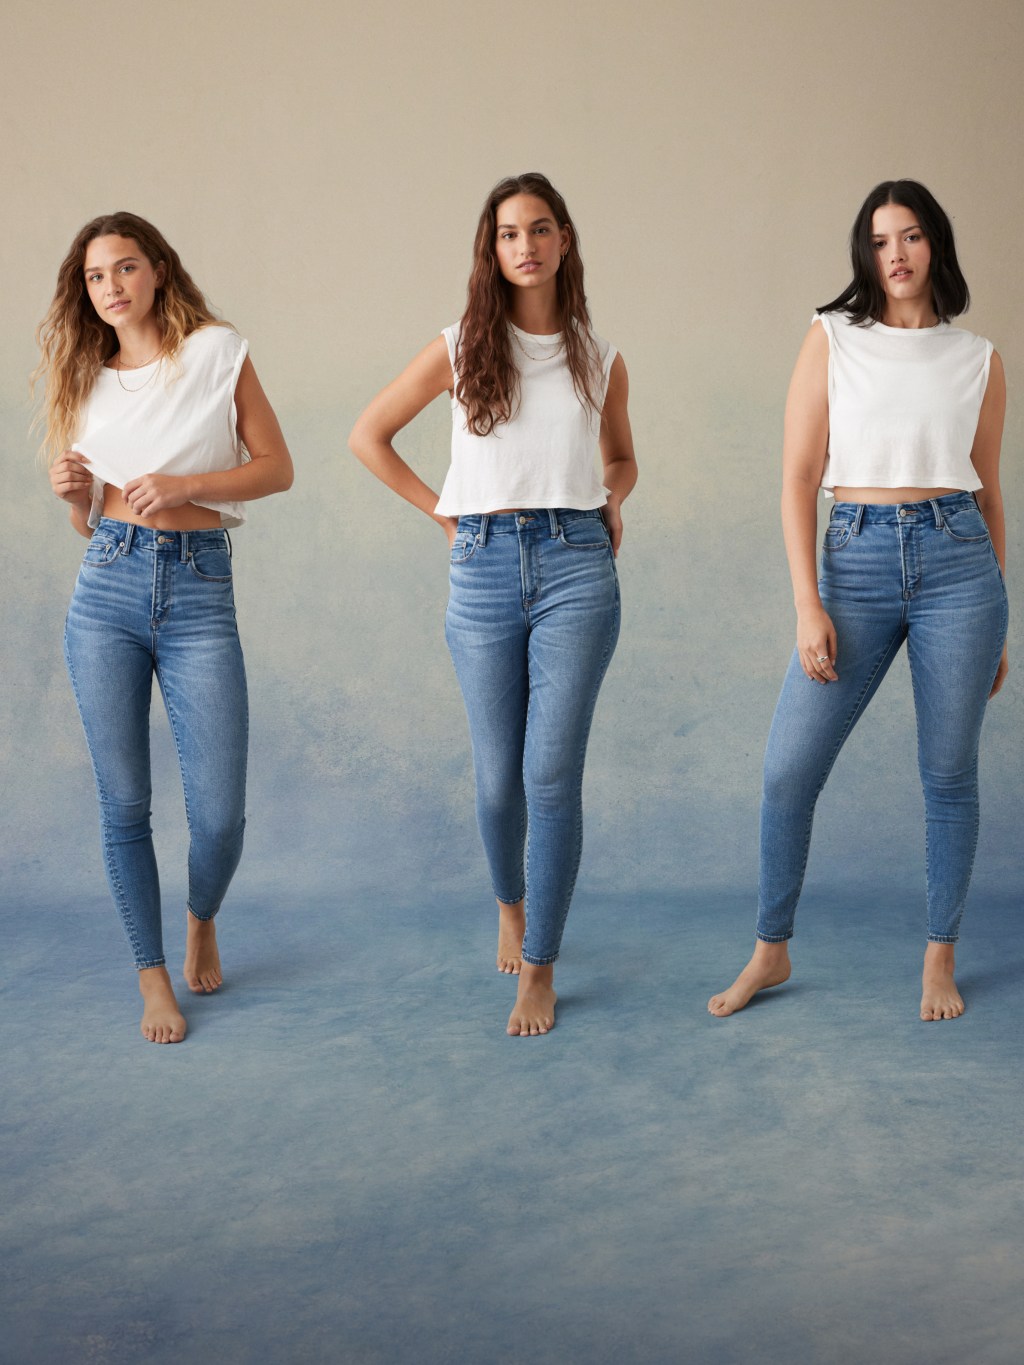 How to Wear Denim on Denim Outfits - #AEJeans